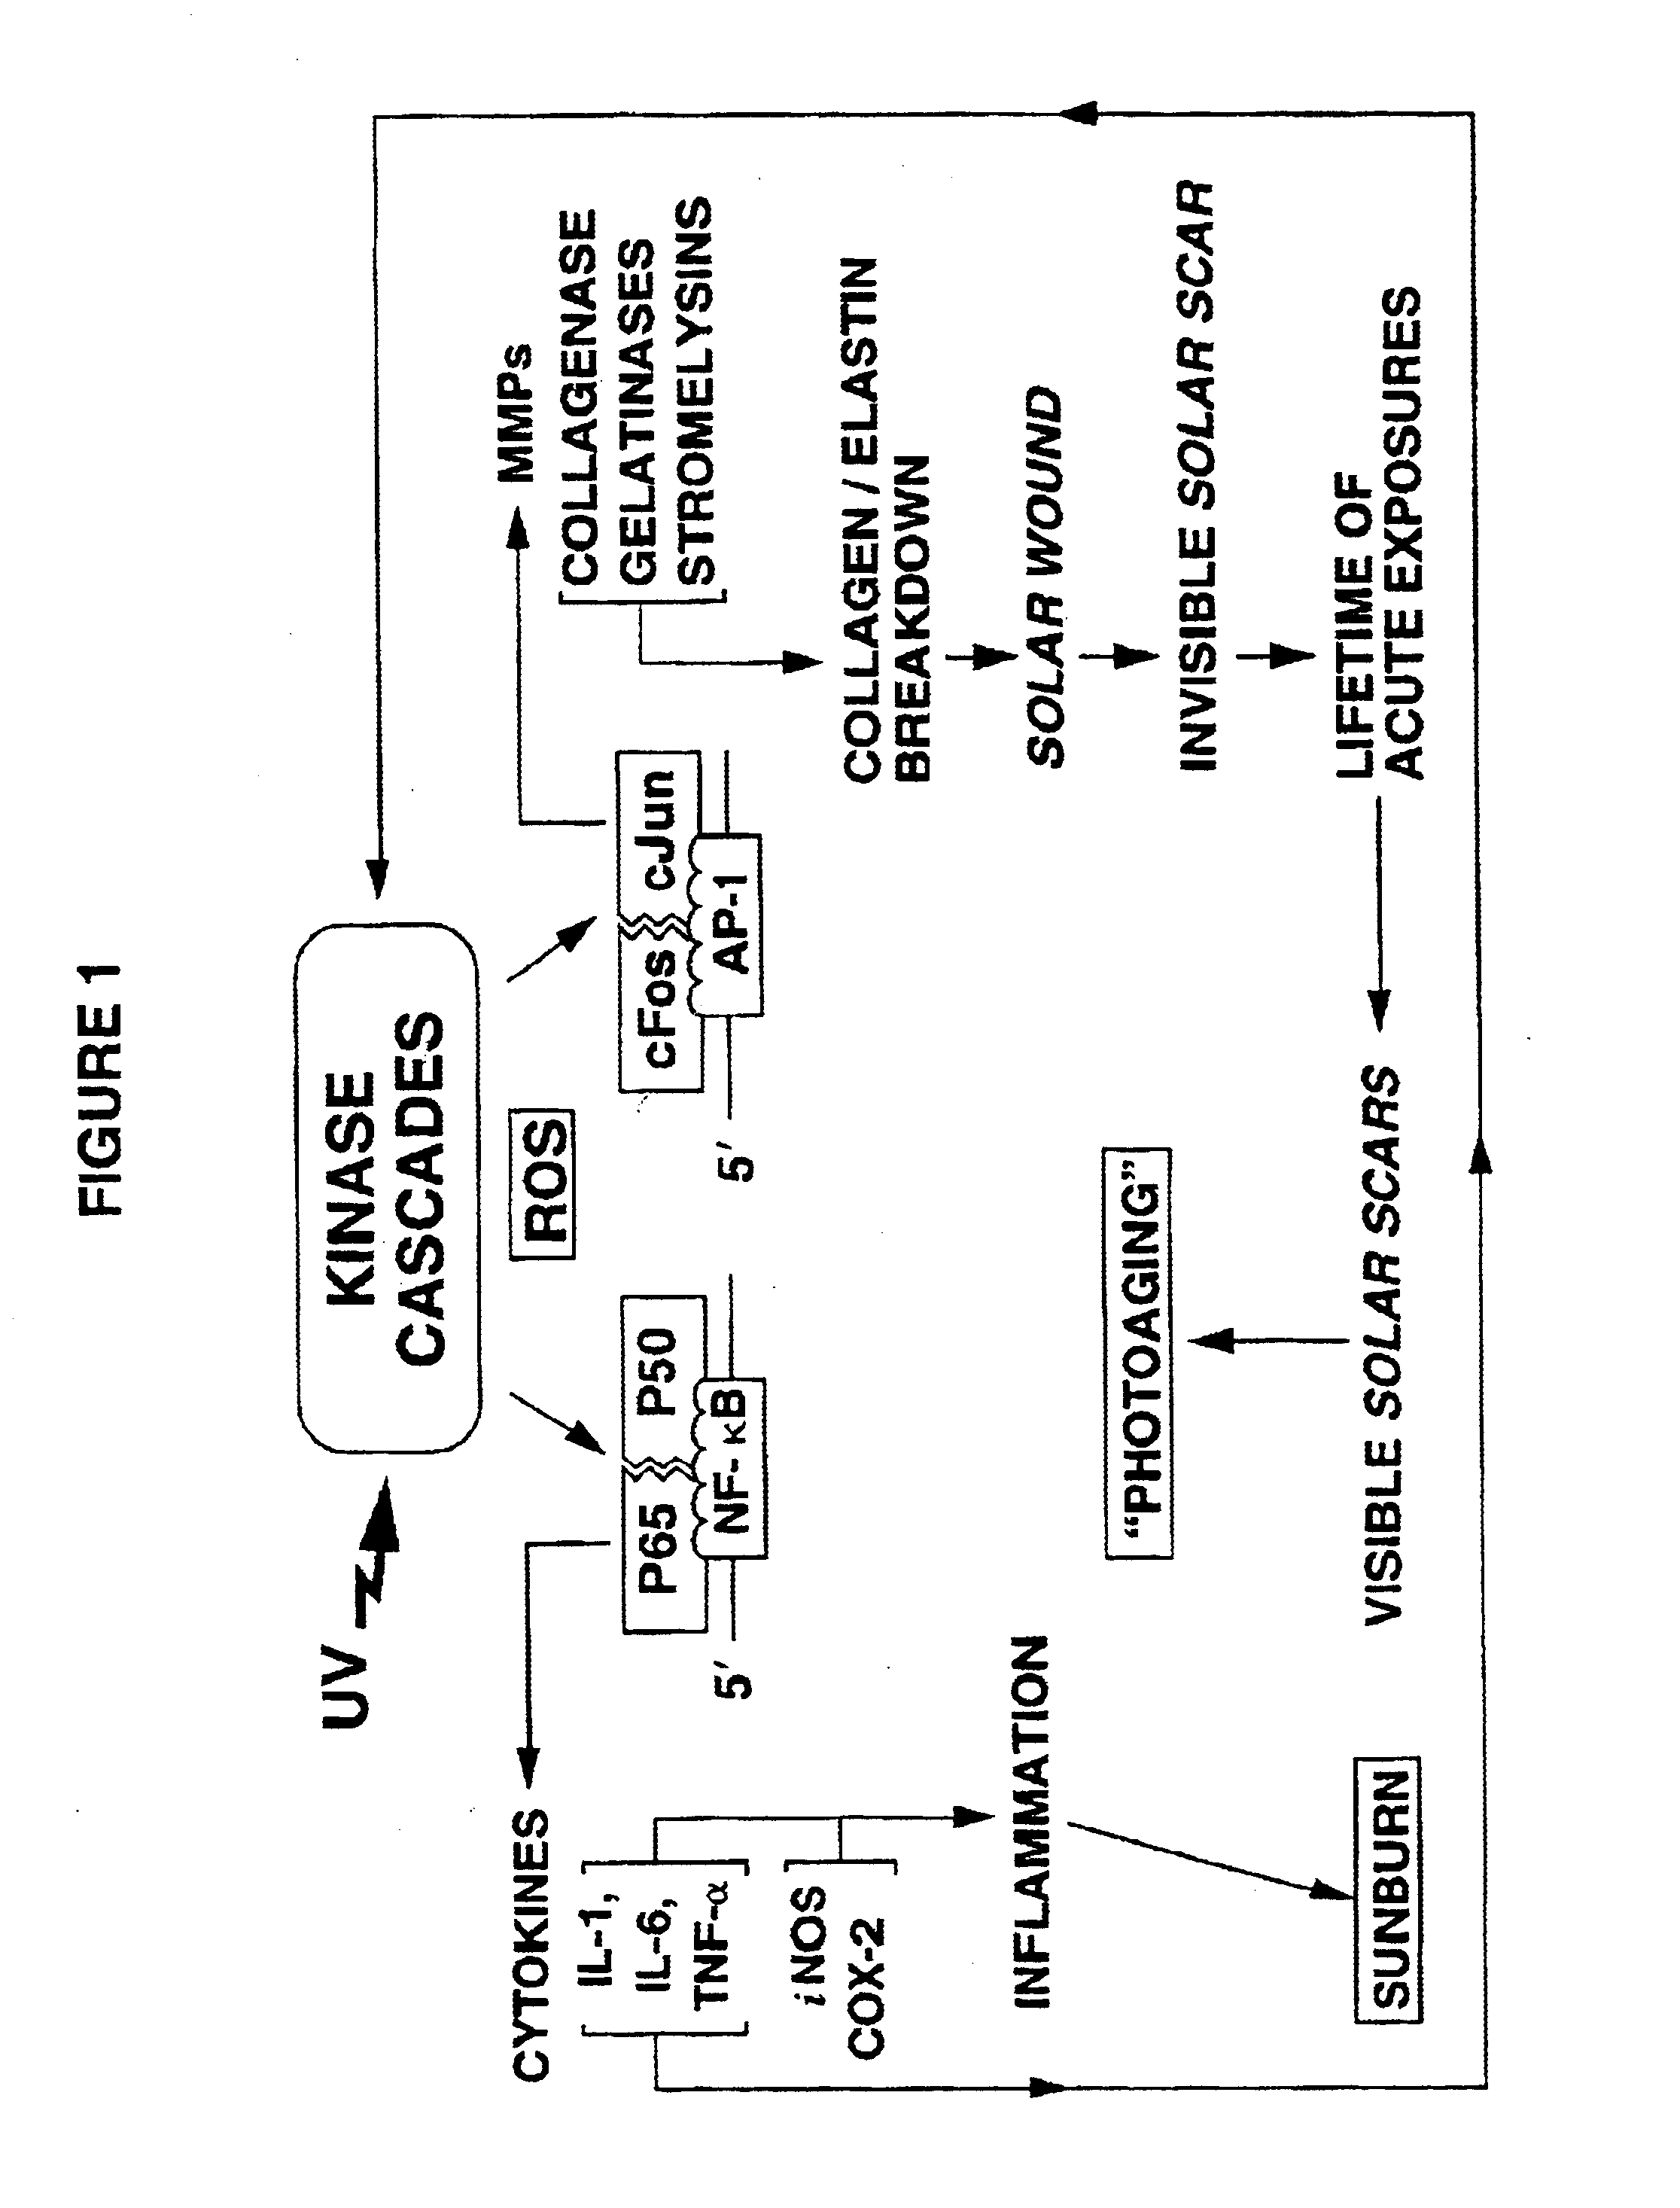 Compositions and methods using direct MMP inhibitors for inhibiting photoaging of skin